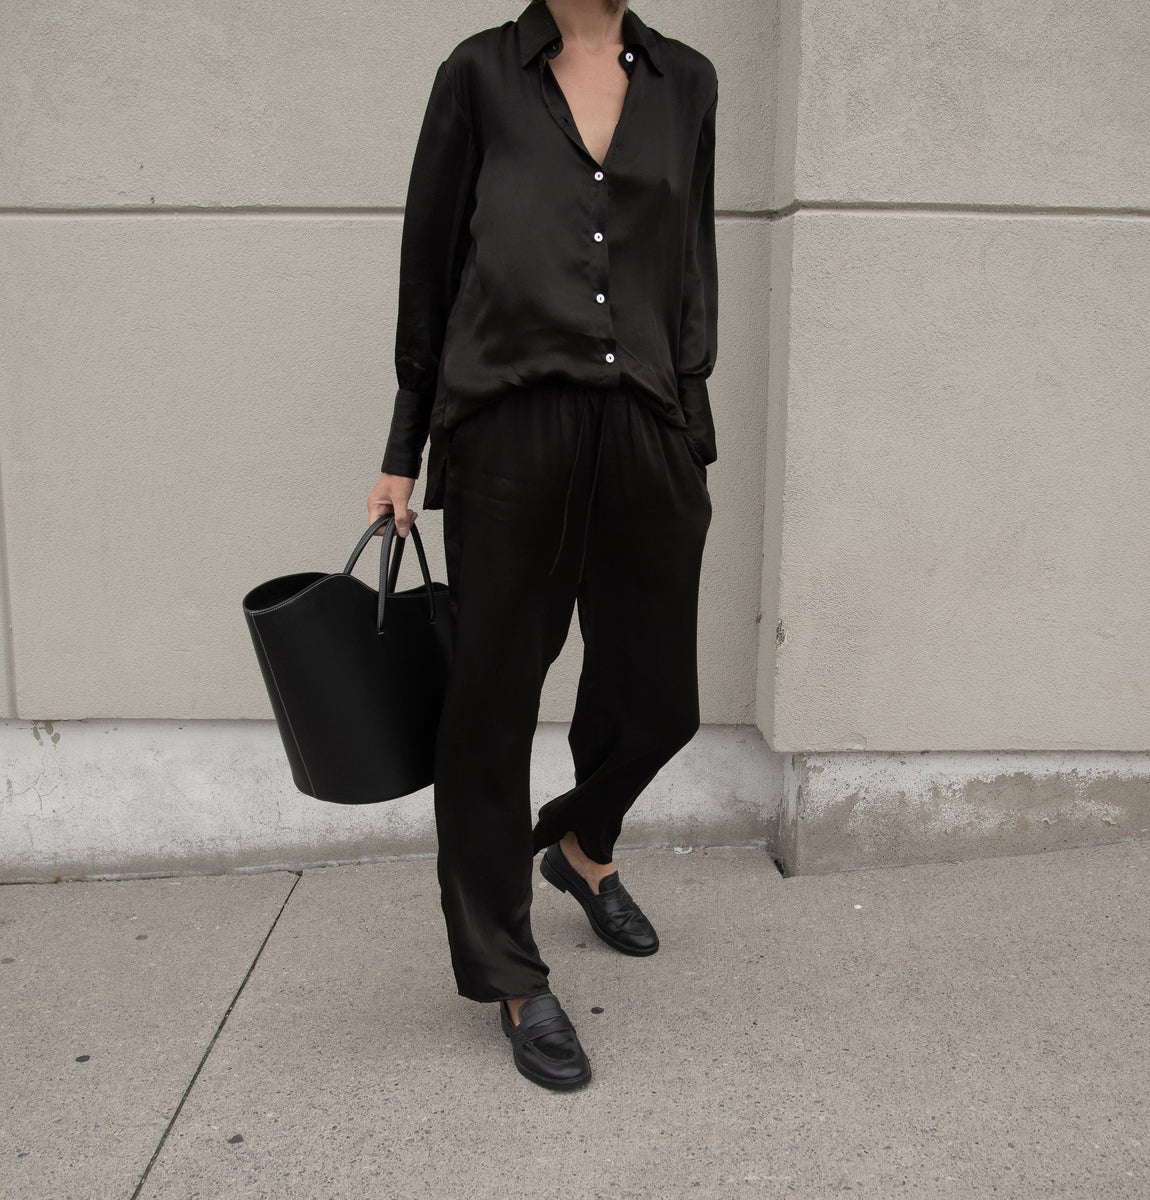 A woman wearing the Leonie Pant - Black made from Bemberg Cupro fabric while lounging.